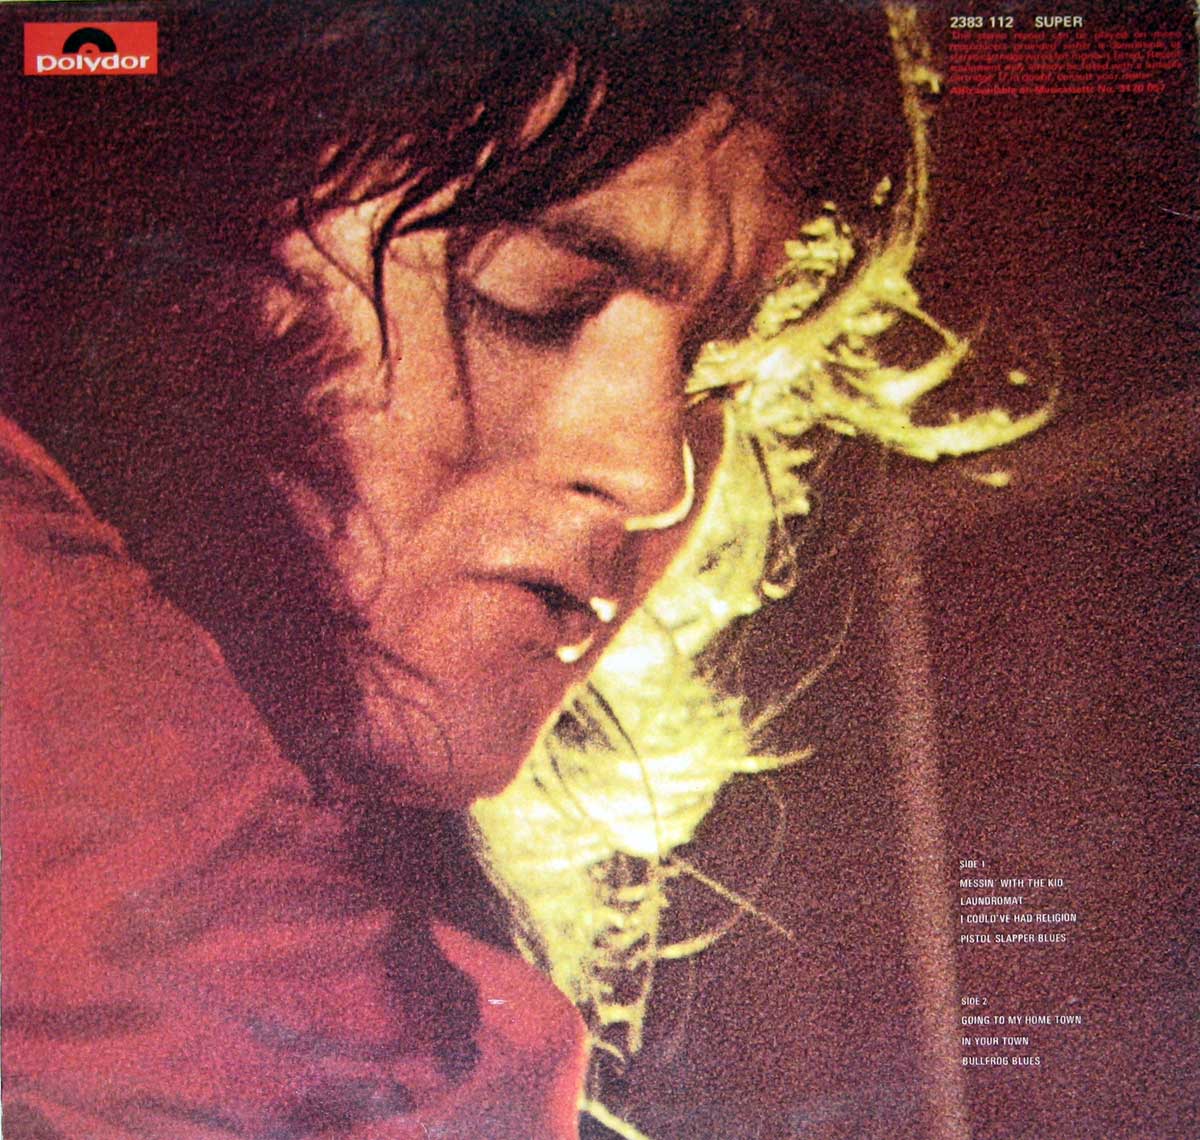 Photo of Rory Gallagher on the inside of the cover